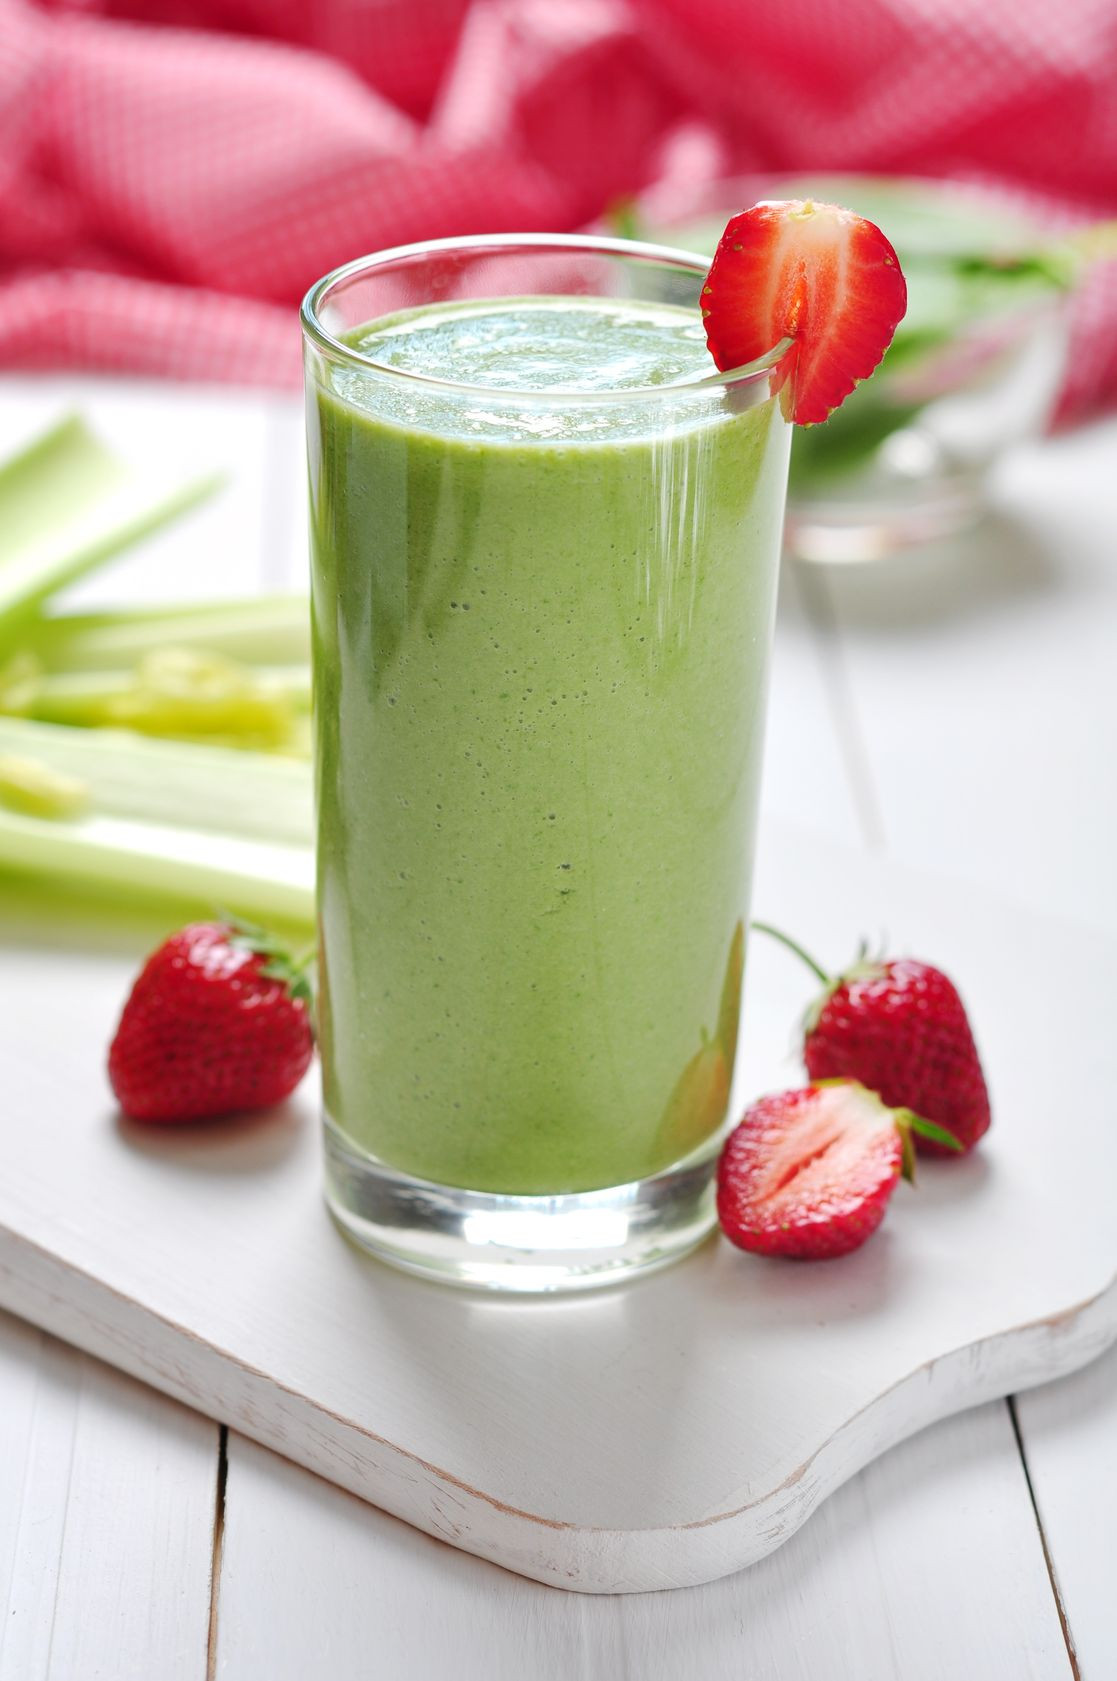 Fruit And Vegetable Smoothie Recipes
 The Fruitgrass pany Debuts An ‘Instant Smoothie’ Gift